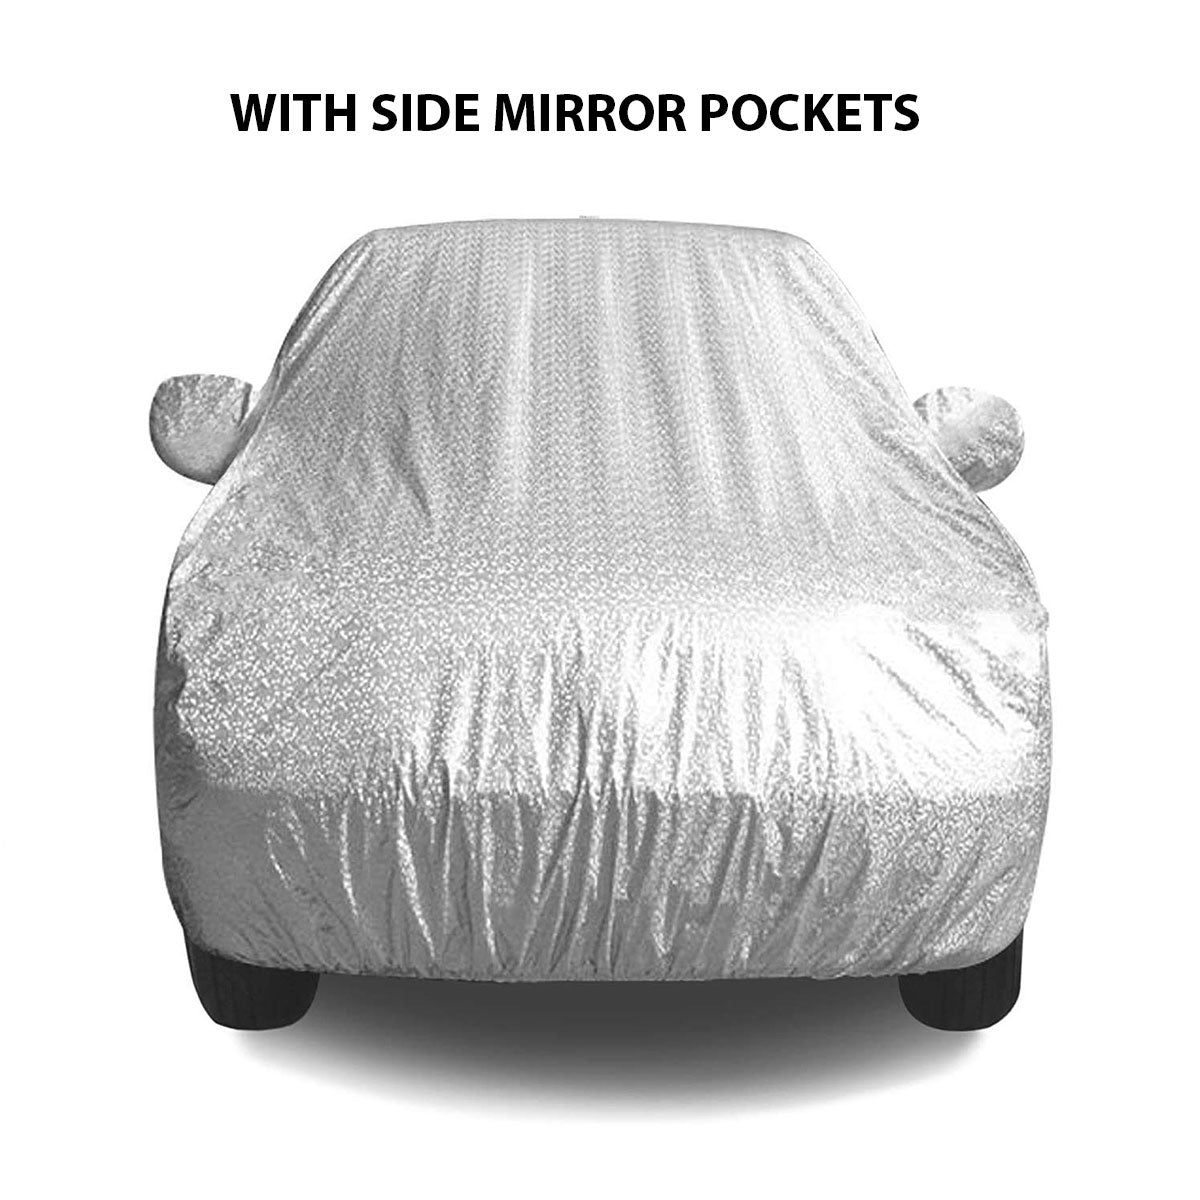 Oshotto Spyro Silver Anti Reflective, dustproof and Water Proof Car Body Cover with Mirror Pockets For Nissan Micra